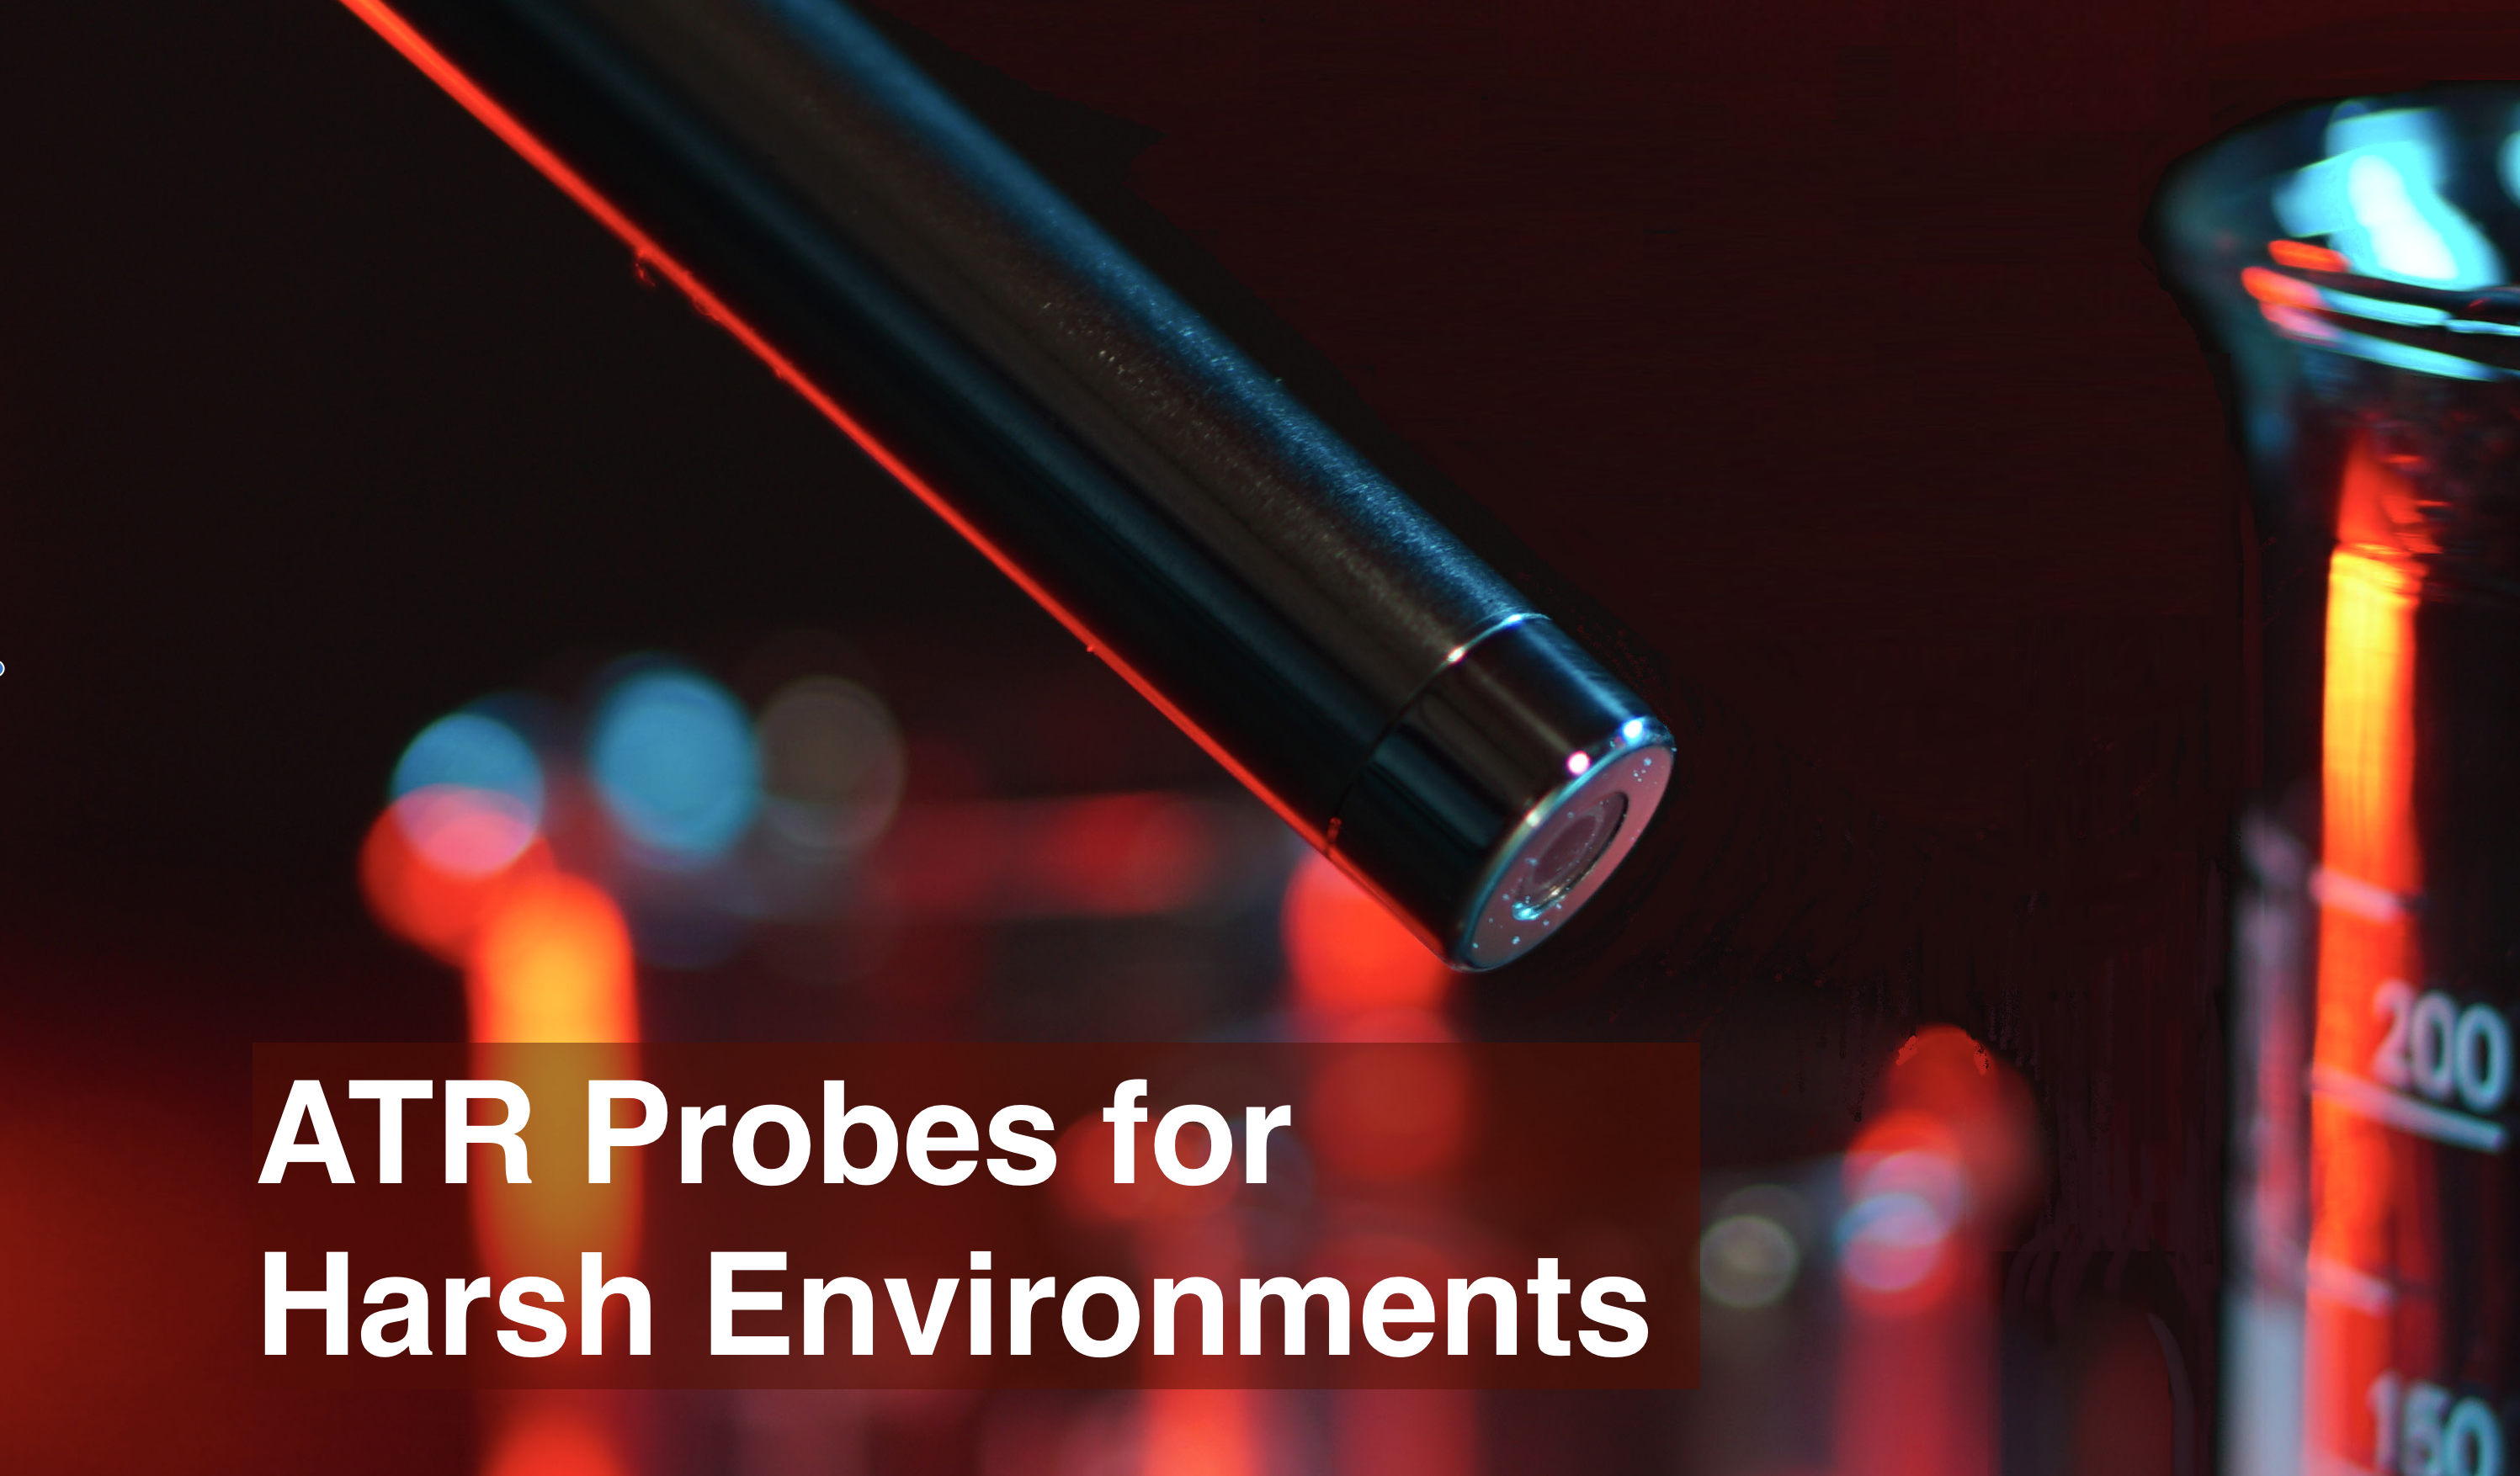 ATR probe for harsh environments positioned prominently with a blurred chemical laboratory background.